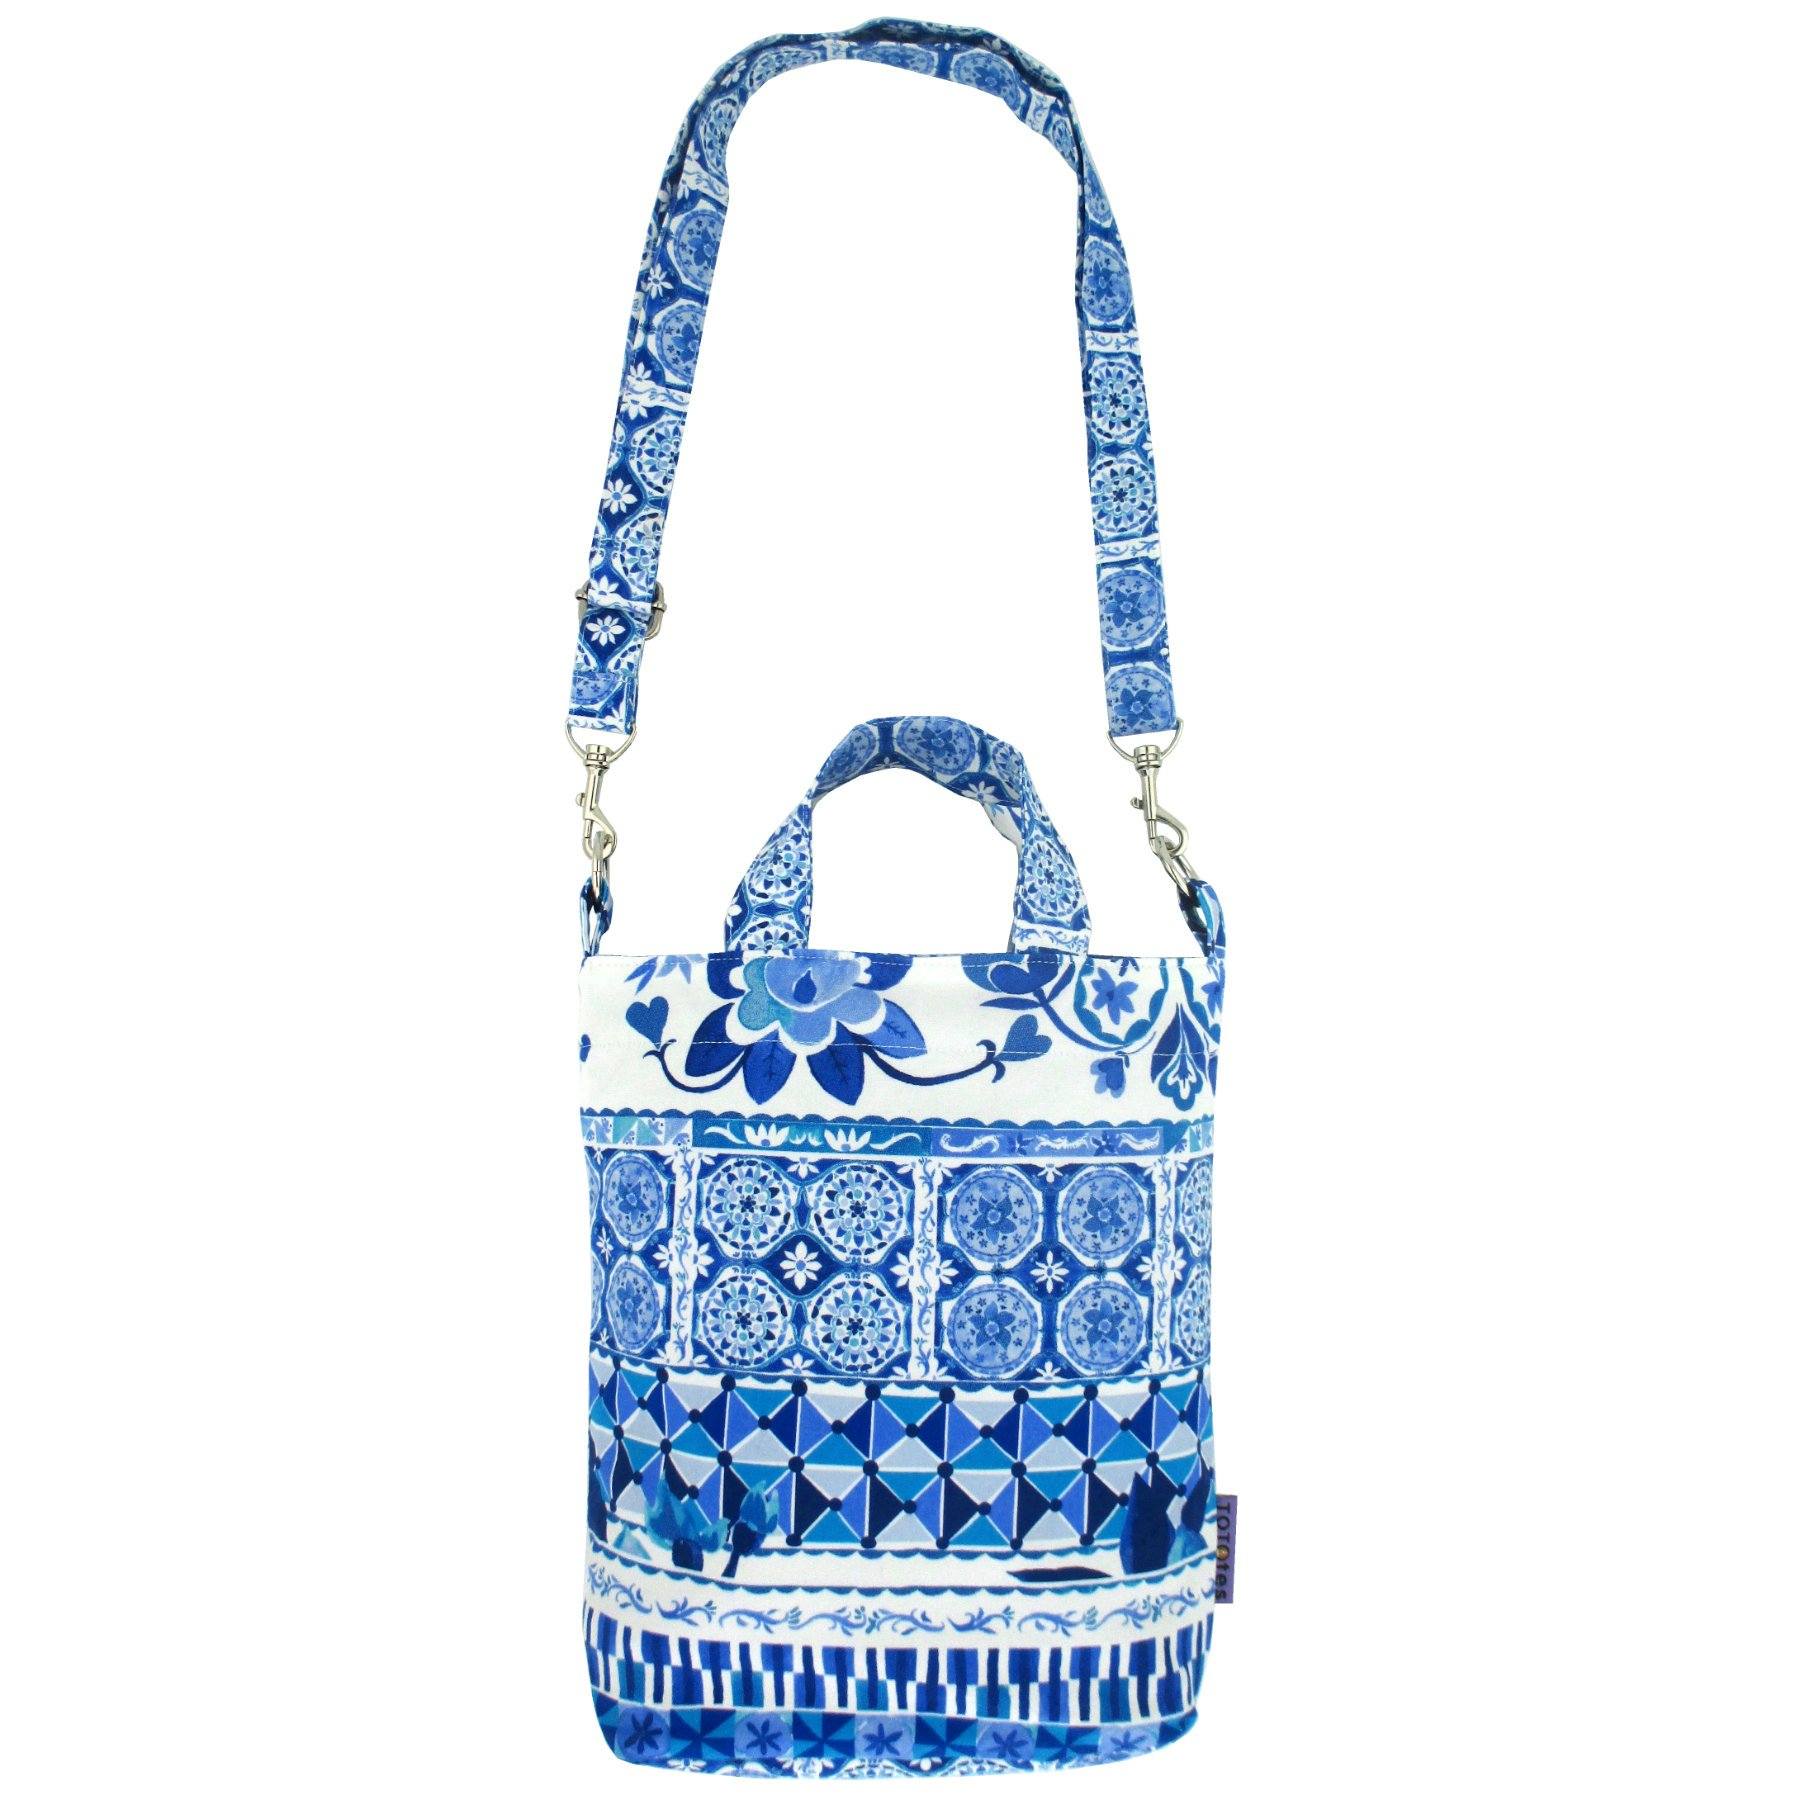 Bright Blue Paisley Floral Mosaic Tiles Patterned Print Duck Cross Body Cotton Tote Bag